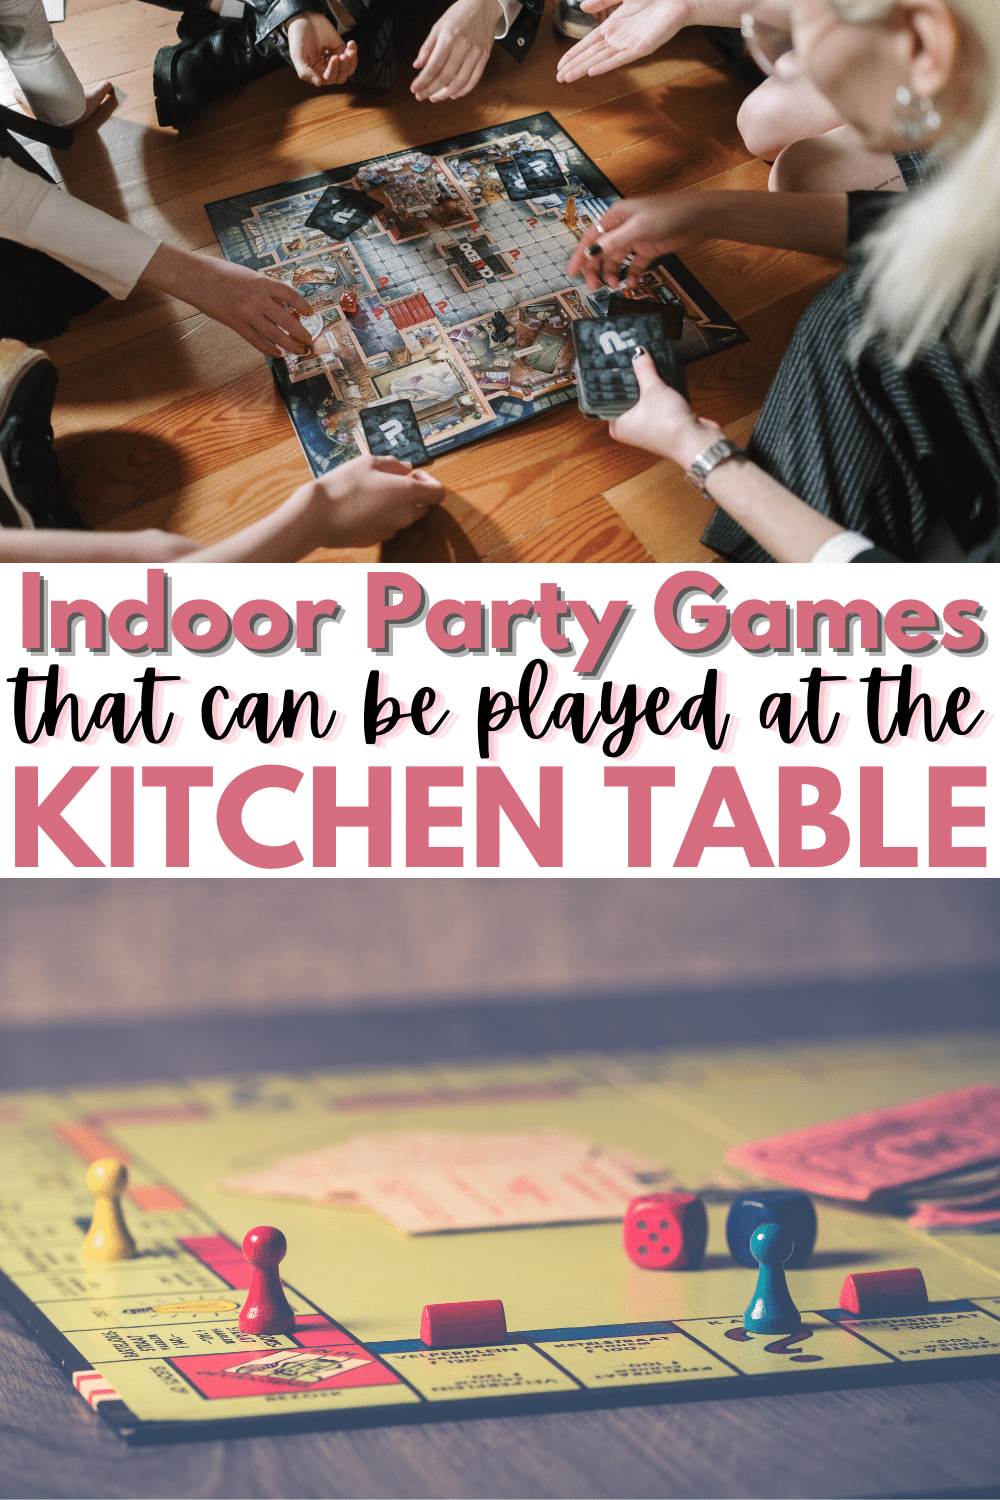 These indoor party games for kids can be played at the kitchen table! No special equipment needed and the kids have a lot of fun playing them! #familyfun #games #partyactivities via @wondermomwannab